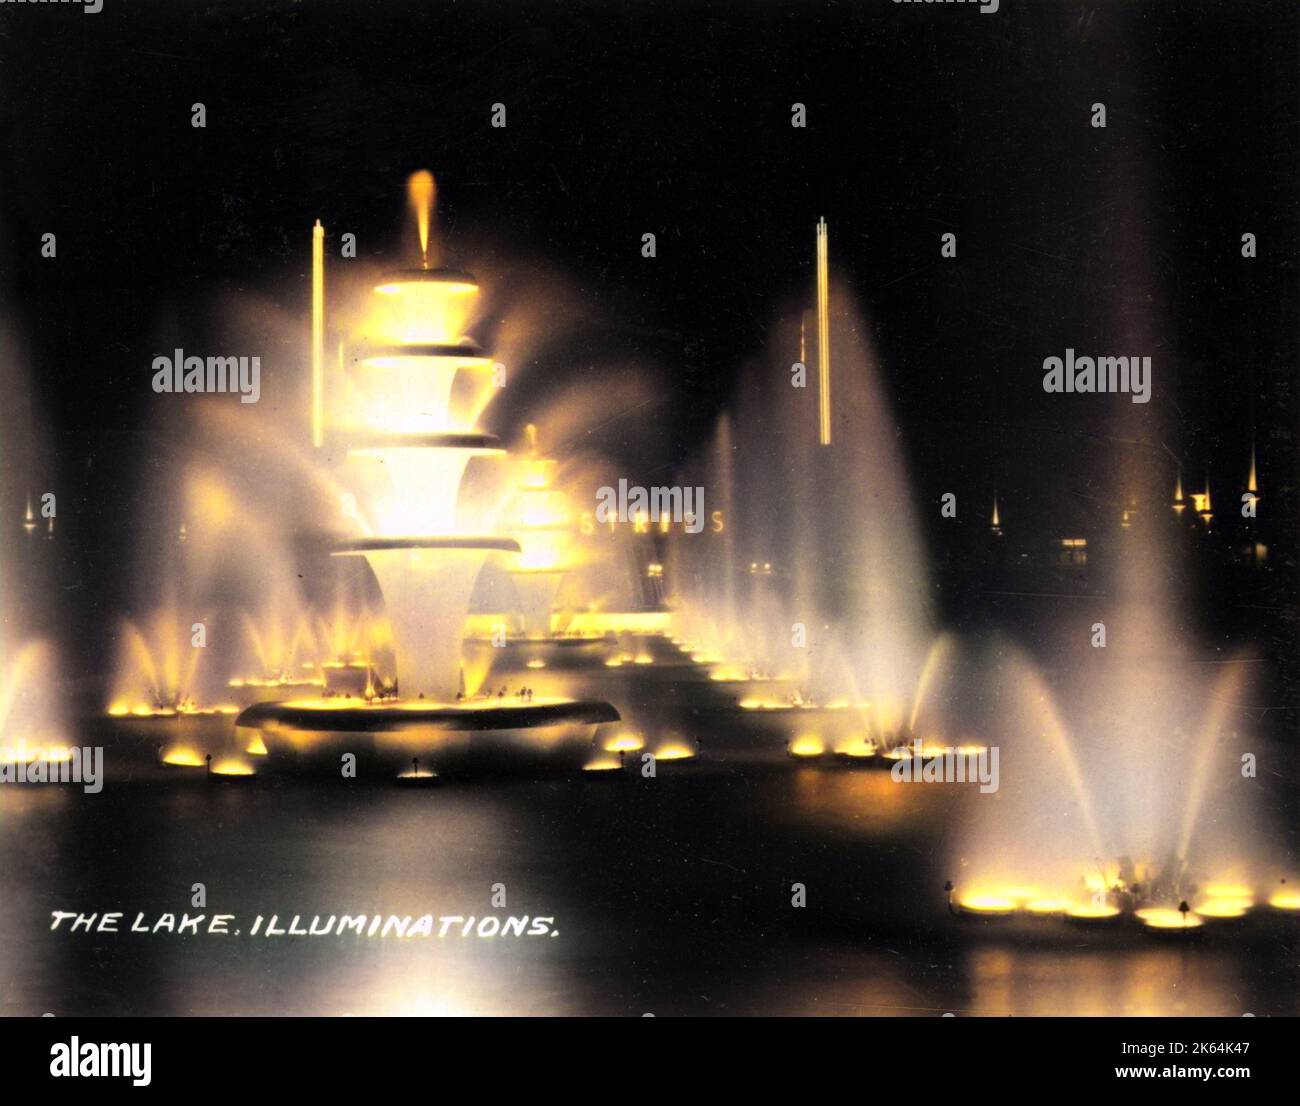 The Lake Illuminations - British Empire Exhibition - Glasgow, Scotland, (May - December 1938). The Exhibition was masterplanned by Thomas S. Tait, who headed of a team of nine architects, which included Basil Spence and Jack Coia. Stock Photo